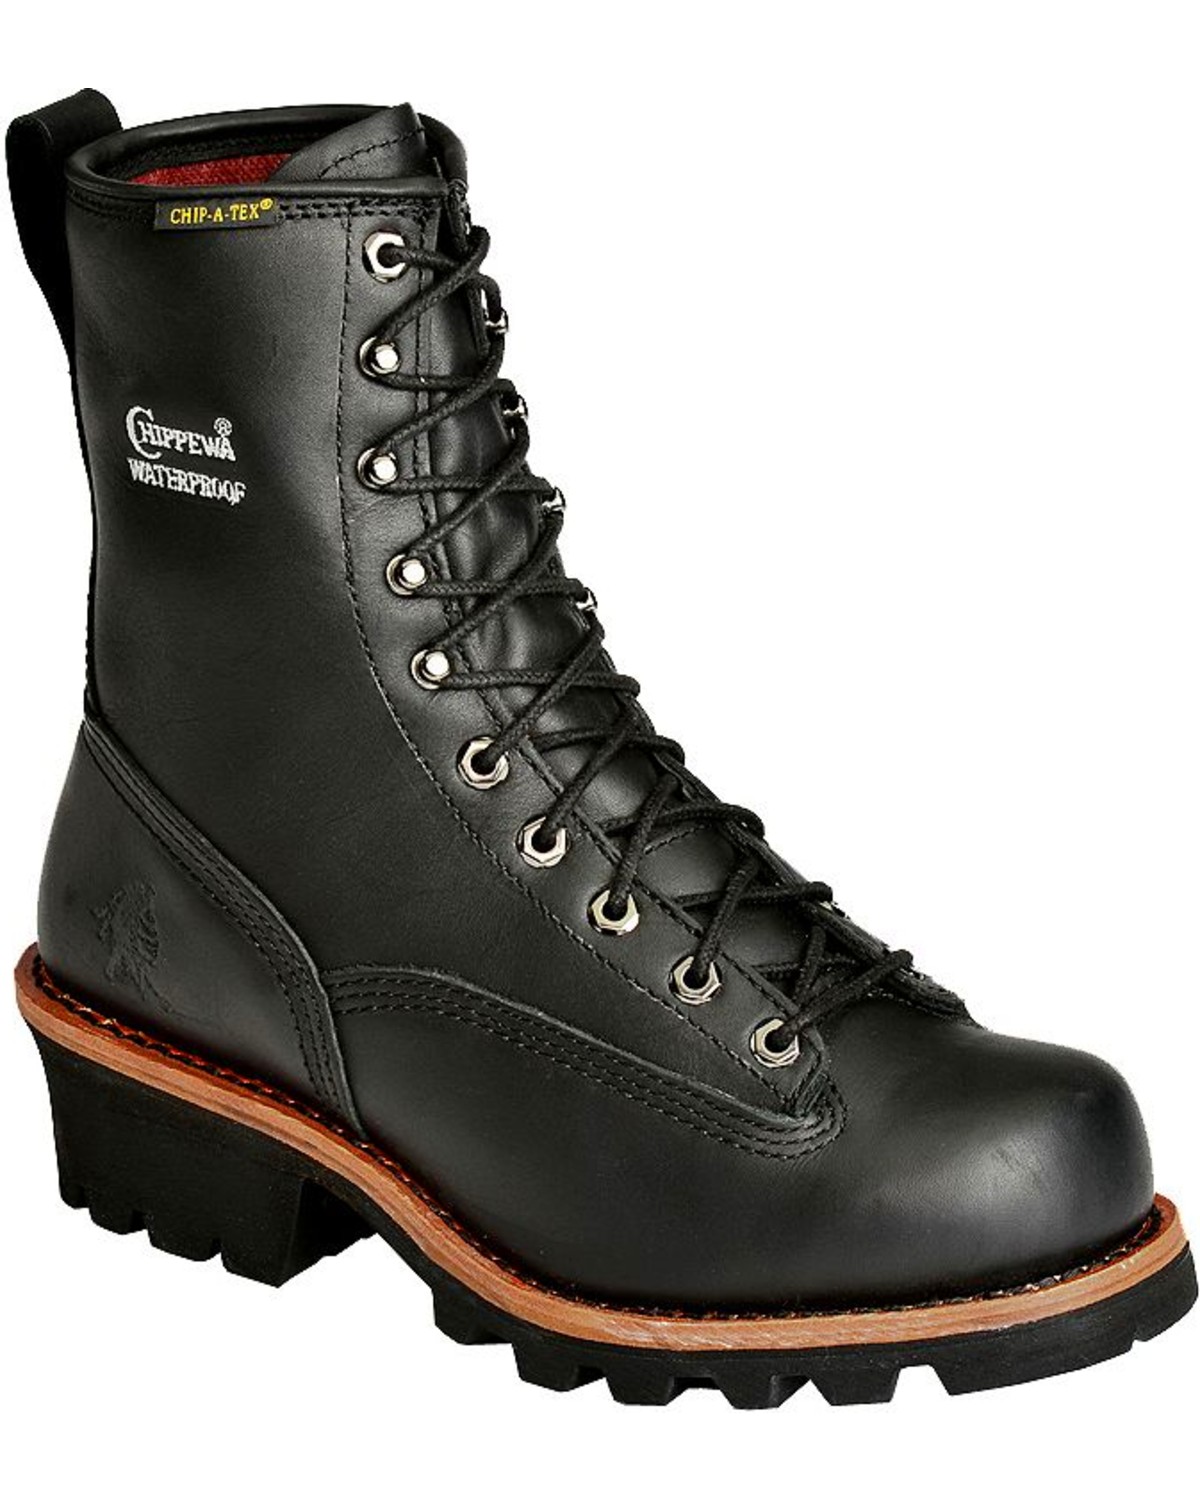 Chippewa Men's Rugged Outdoor Composite 